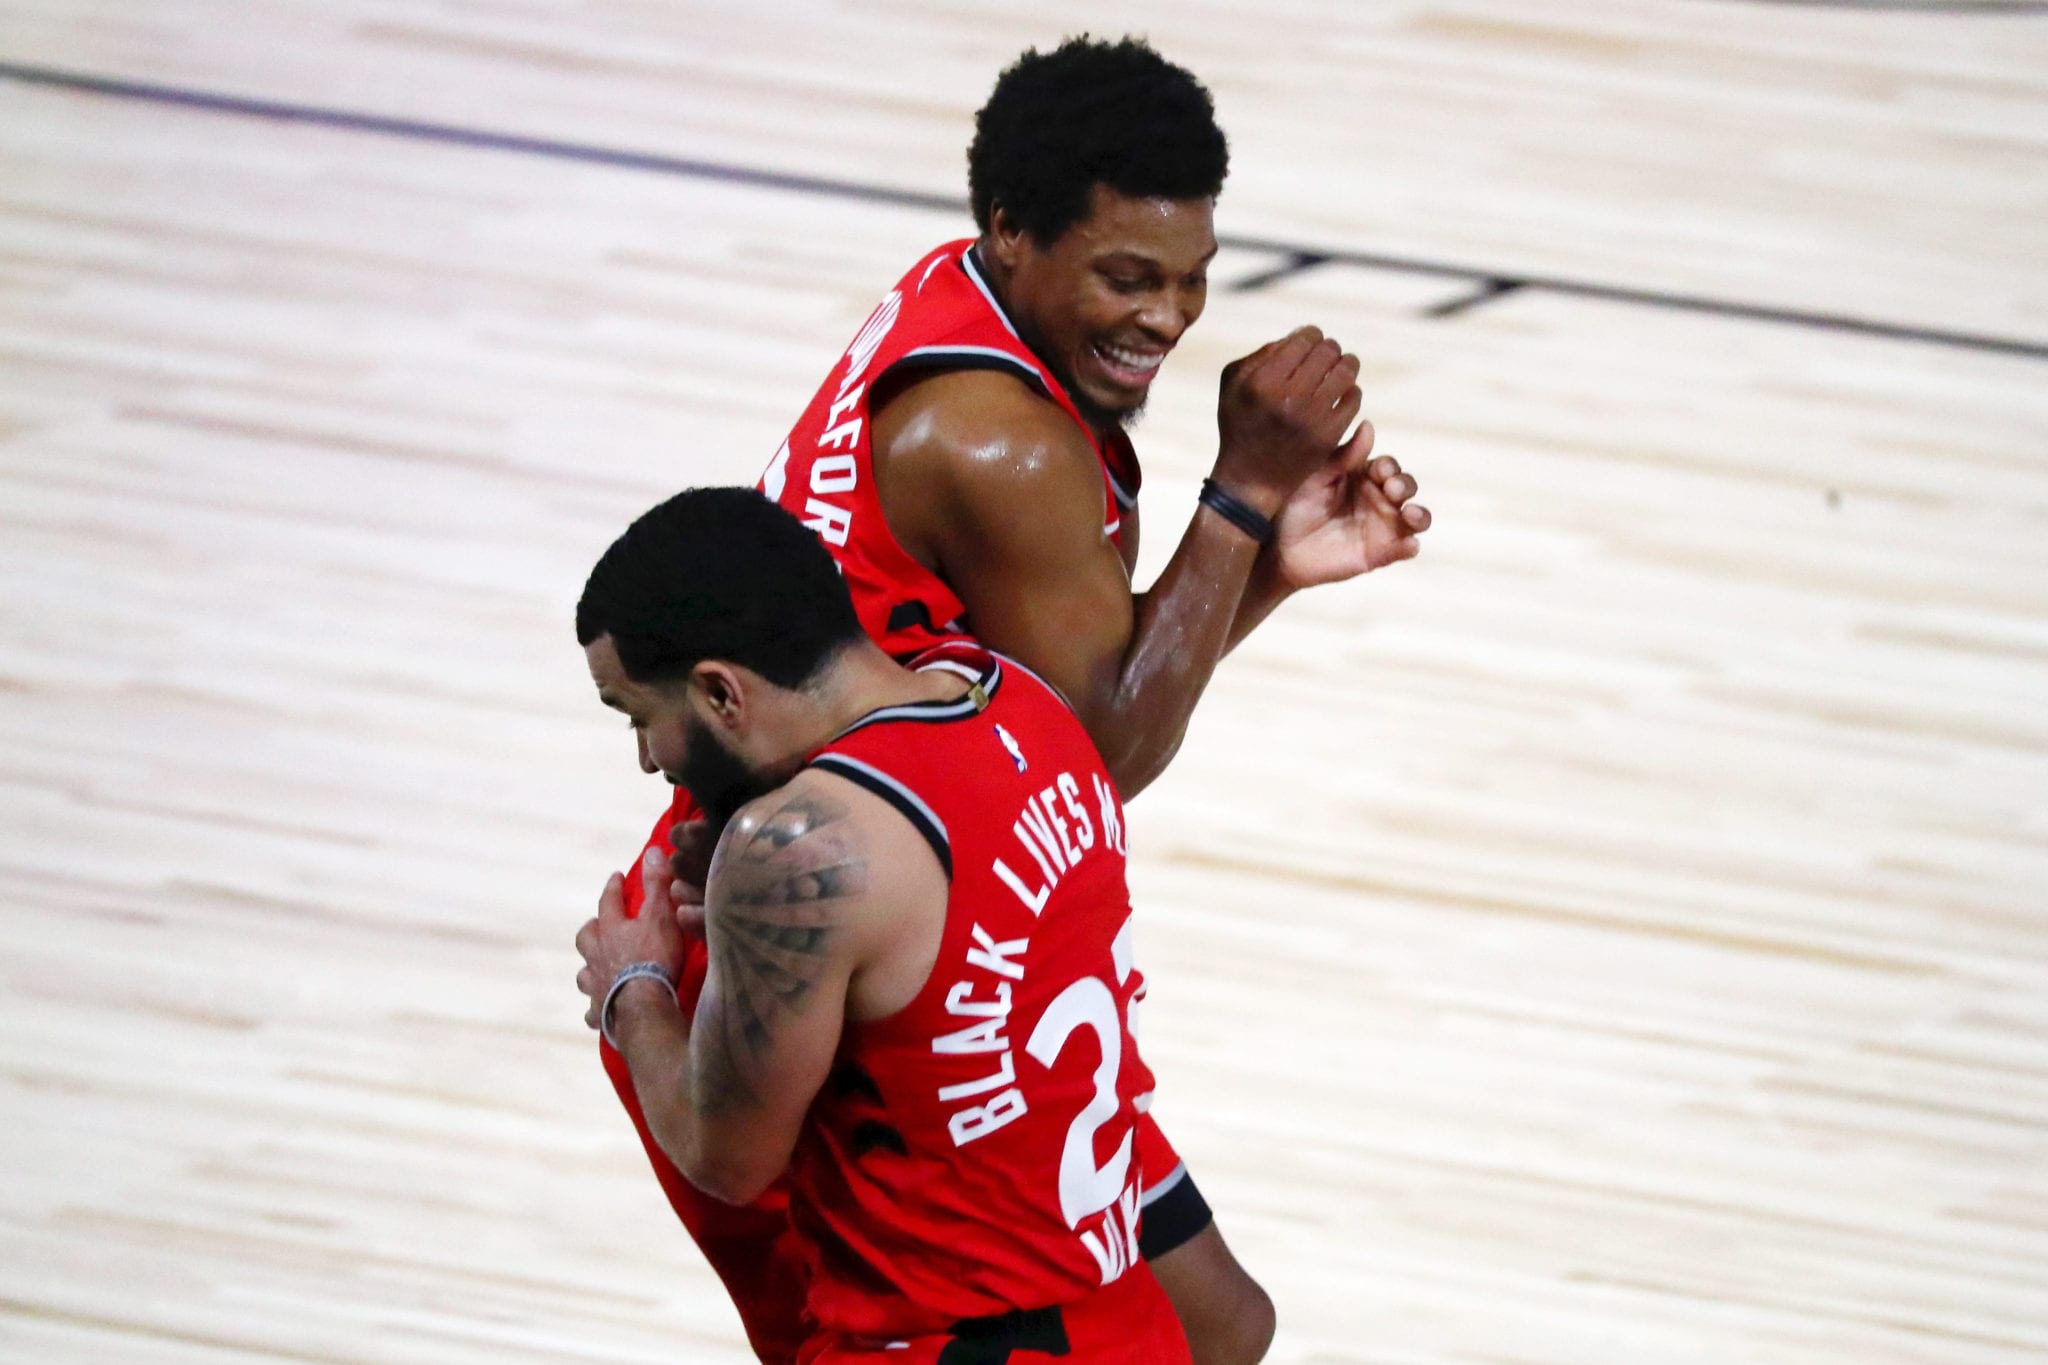 Toronto To Tampa? The Potential Home For The Raptors In 2020/21